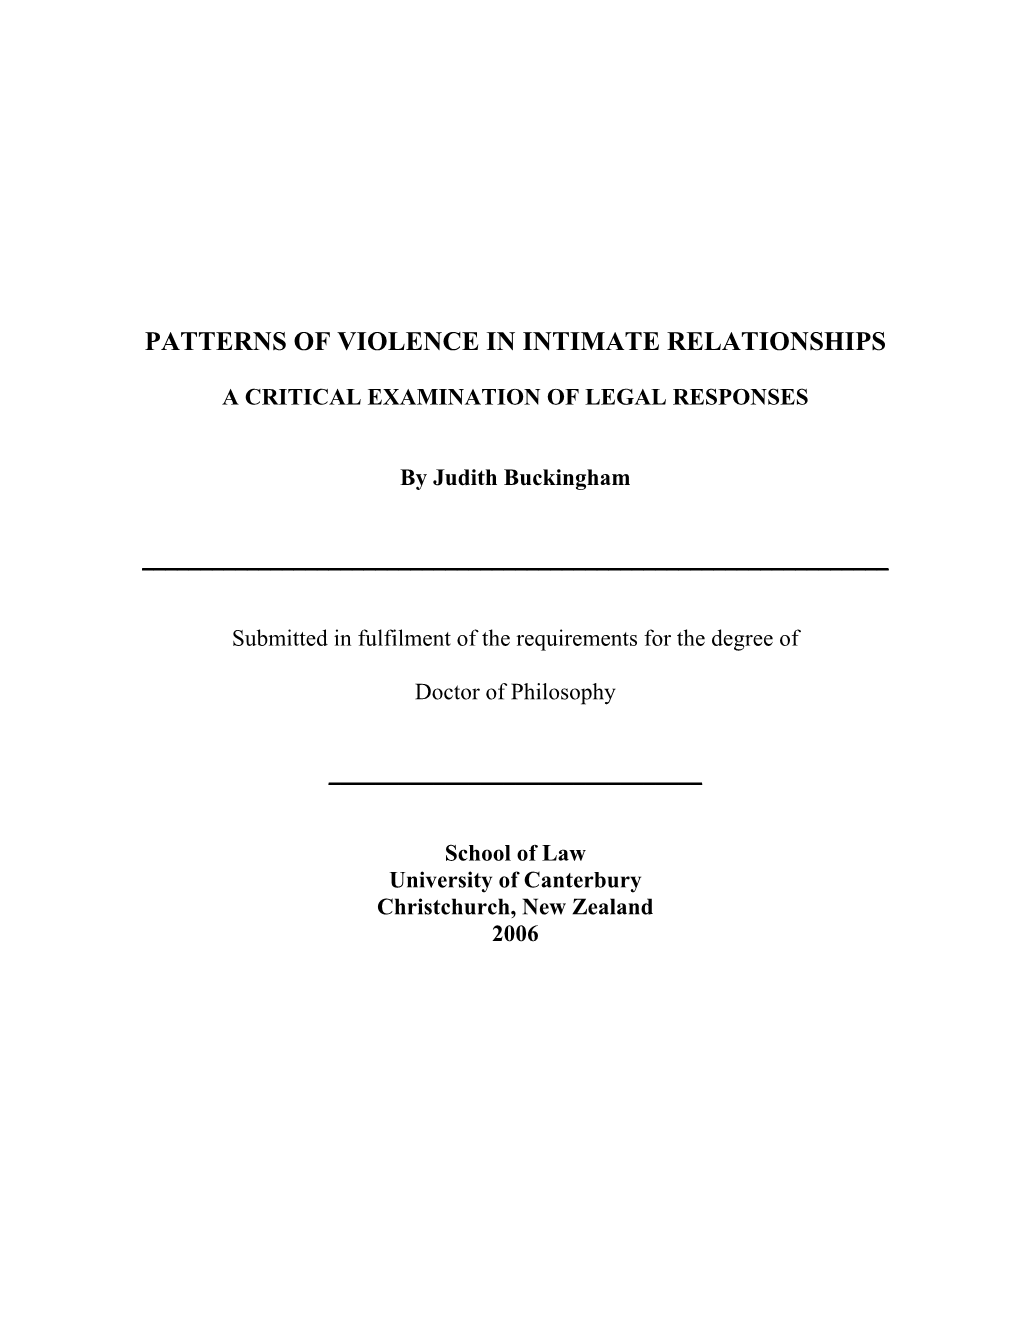 Patterns of Violence in Intimate Relationships